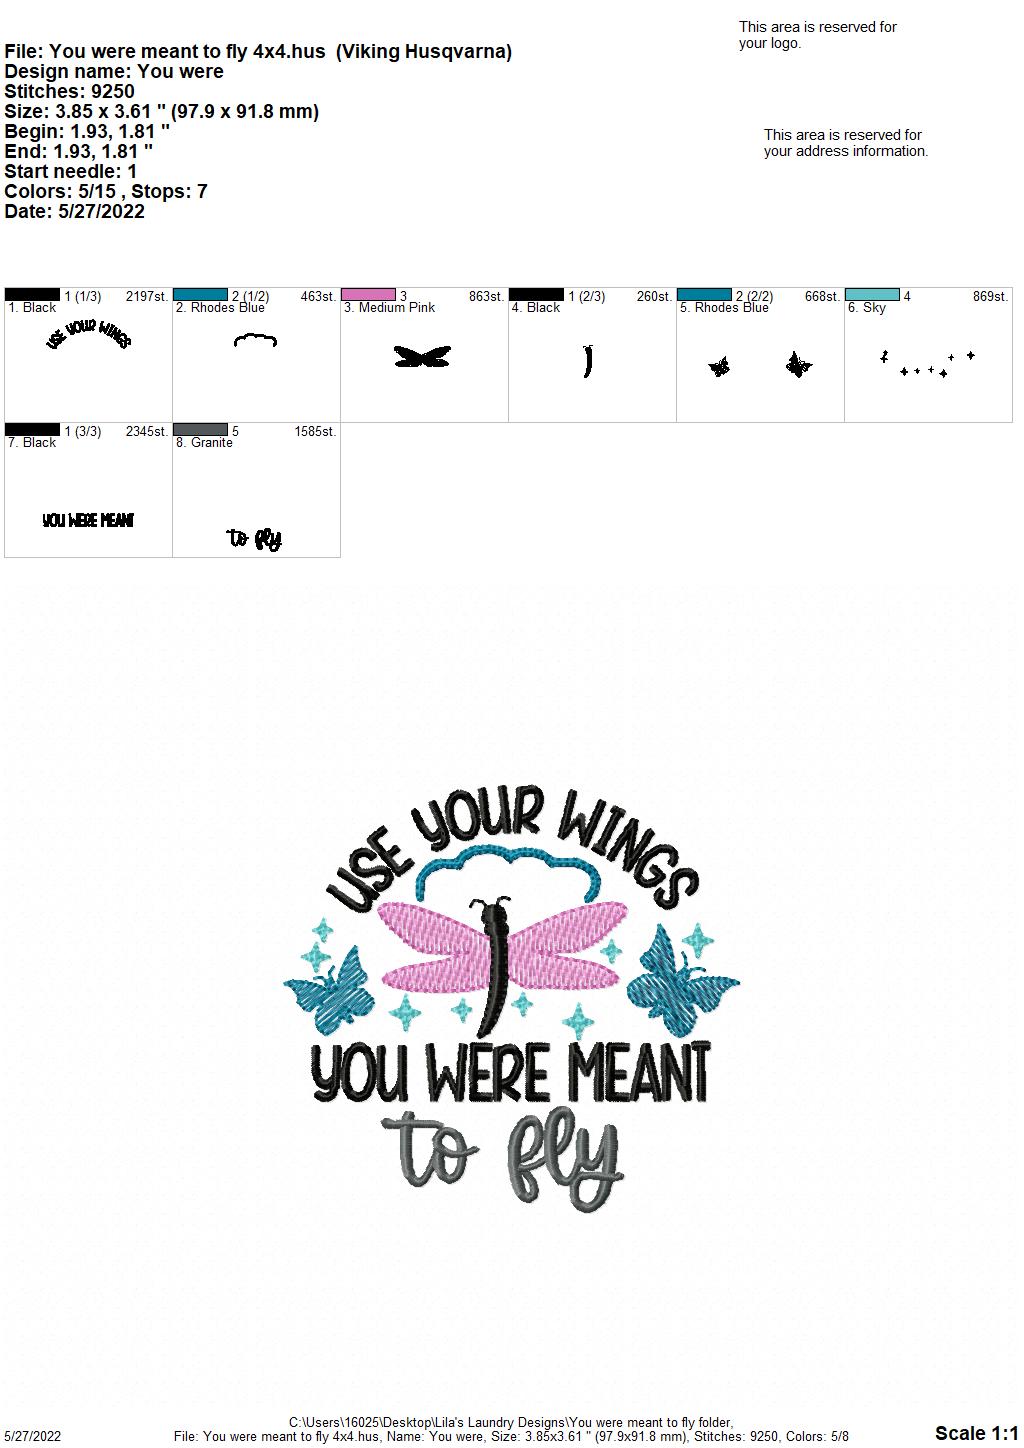 You Were Meant to Fly - 4 sizes- Digital Embroidery Design